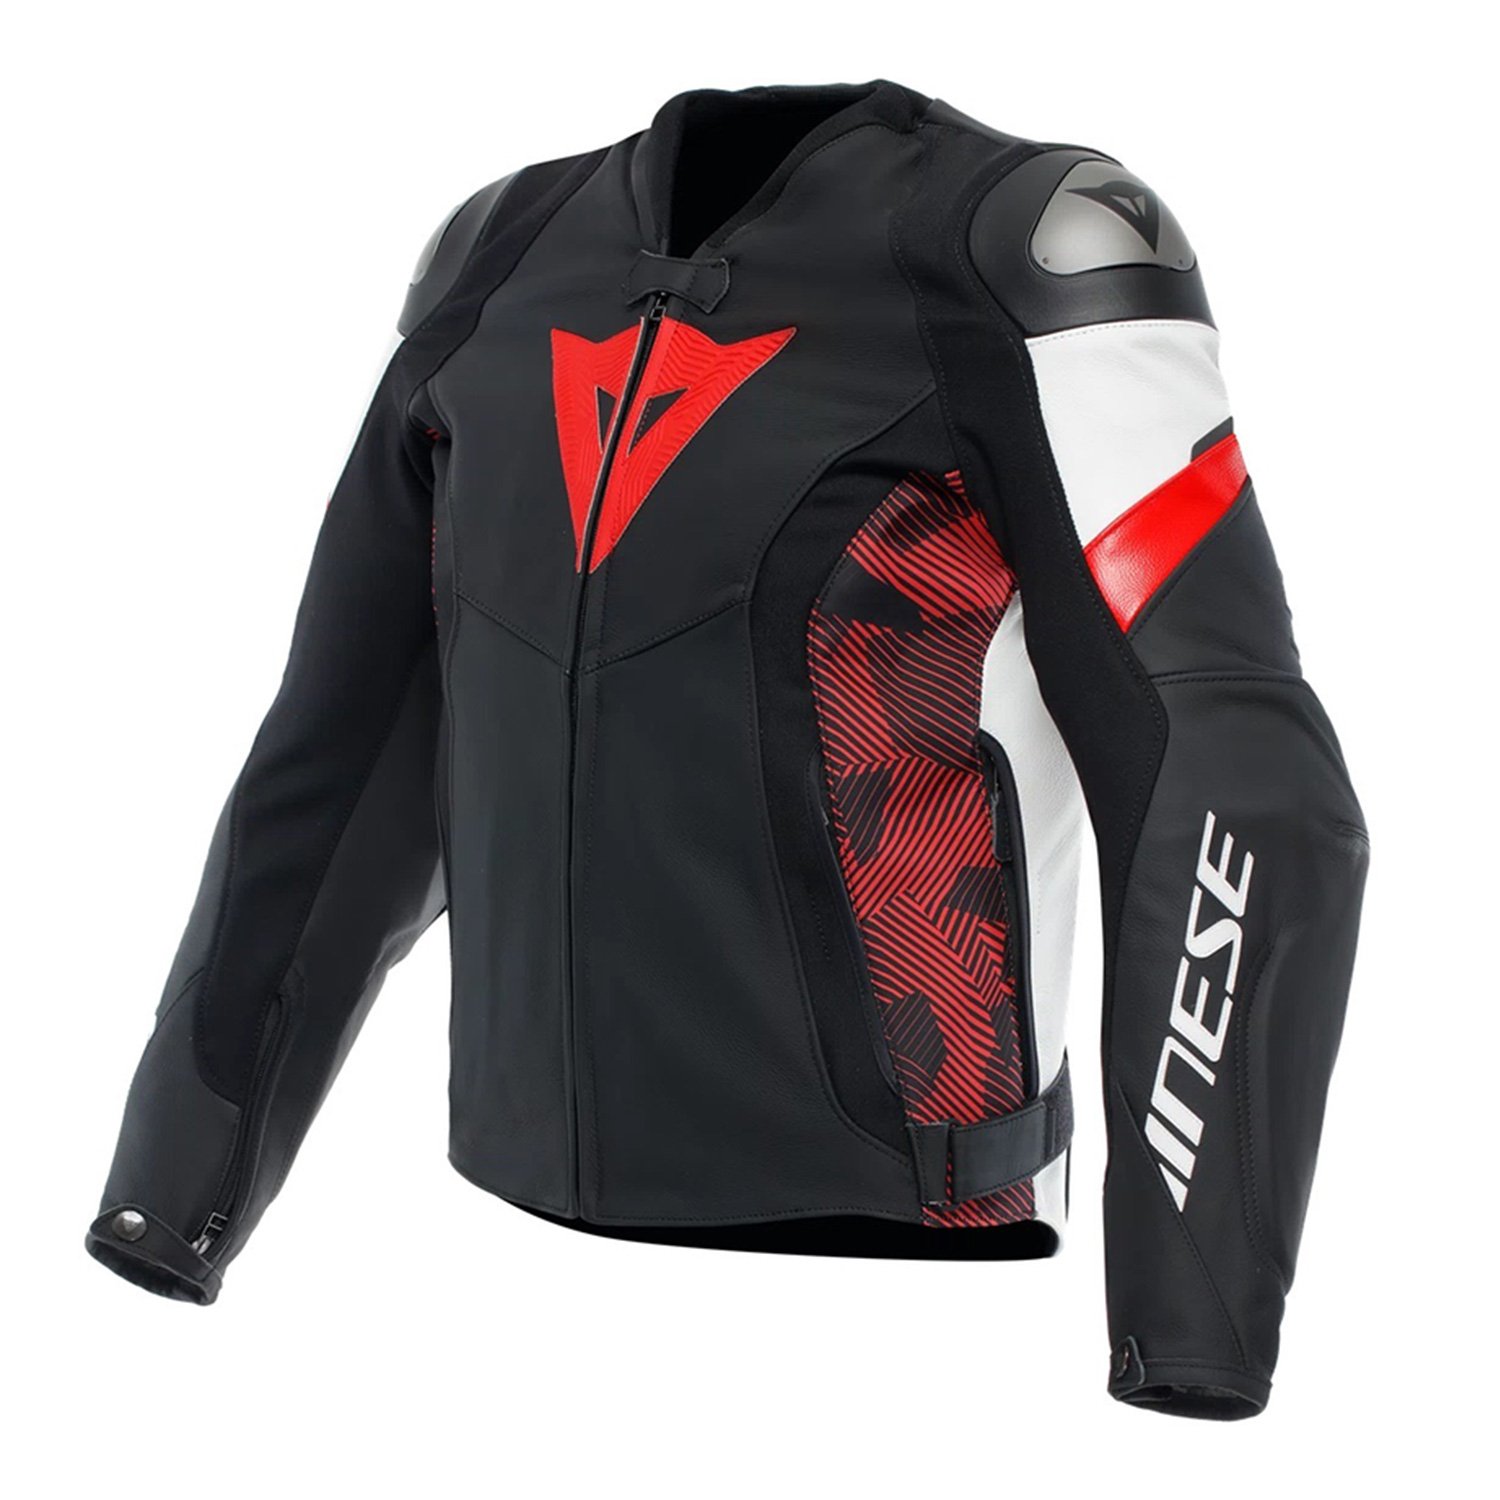 Image of Dainese Avro Leather 5 Jacket Black Red Lava White Size 62 ID 8051019639691